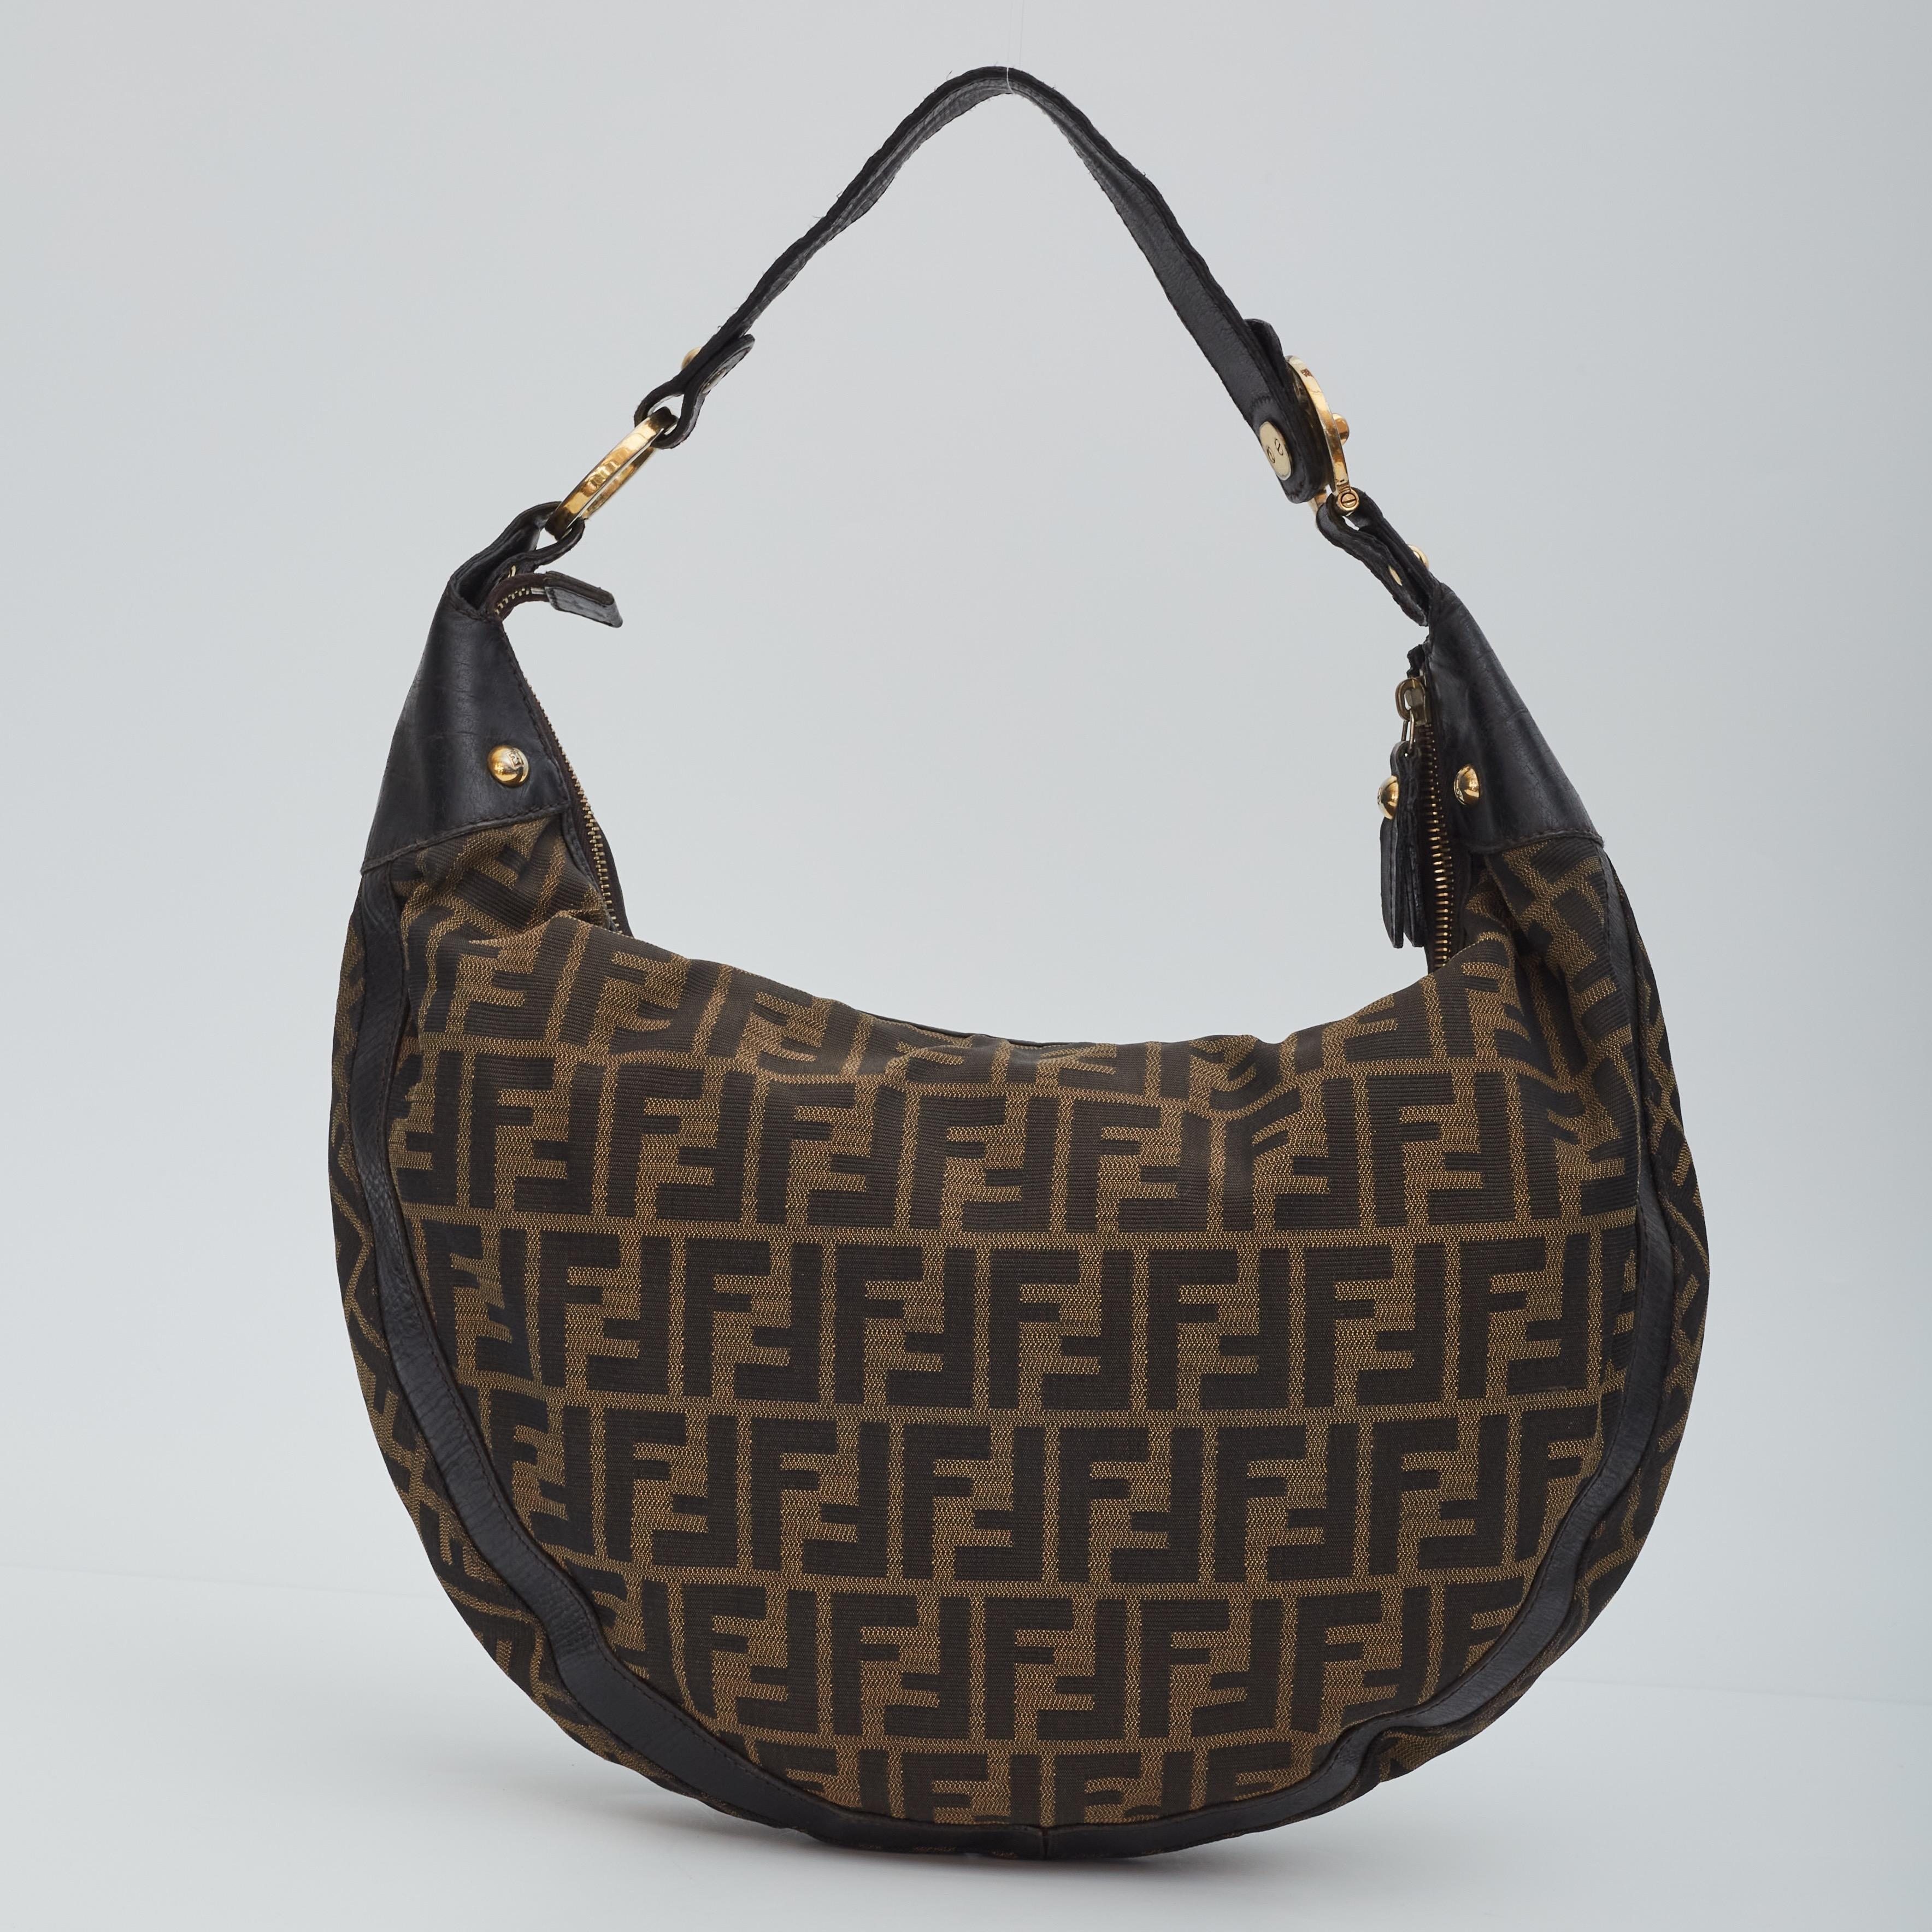 This hobo is constructed of Zucca print Fendi FF canvas with a croissant shape. The bag features leather trim and matching strap handle with gold links and studs. The top zipper opens to a cocoa brown fabric interior with patch pockets.

Color: